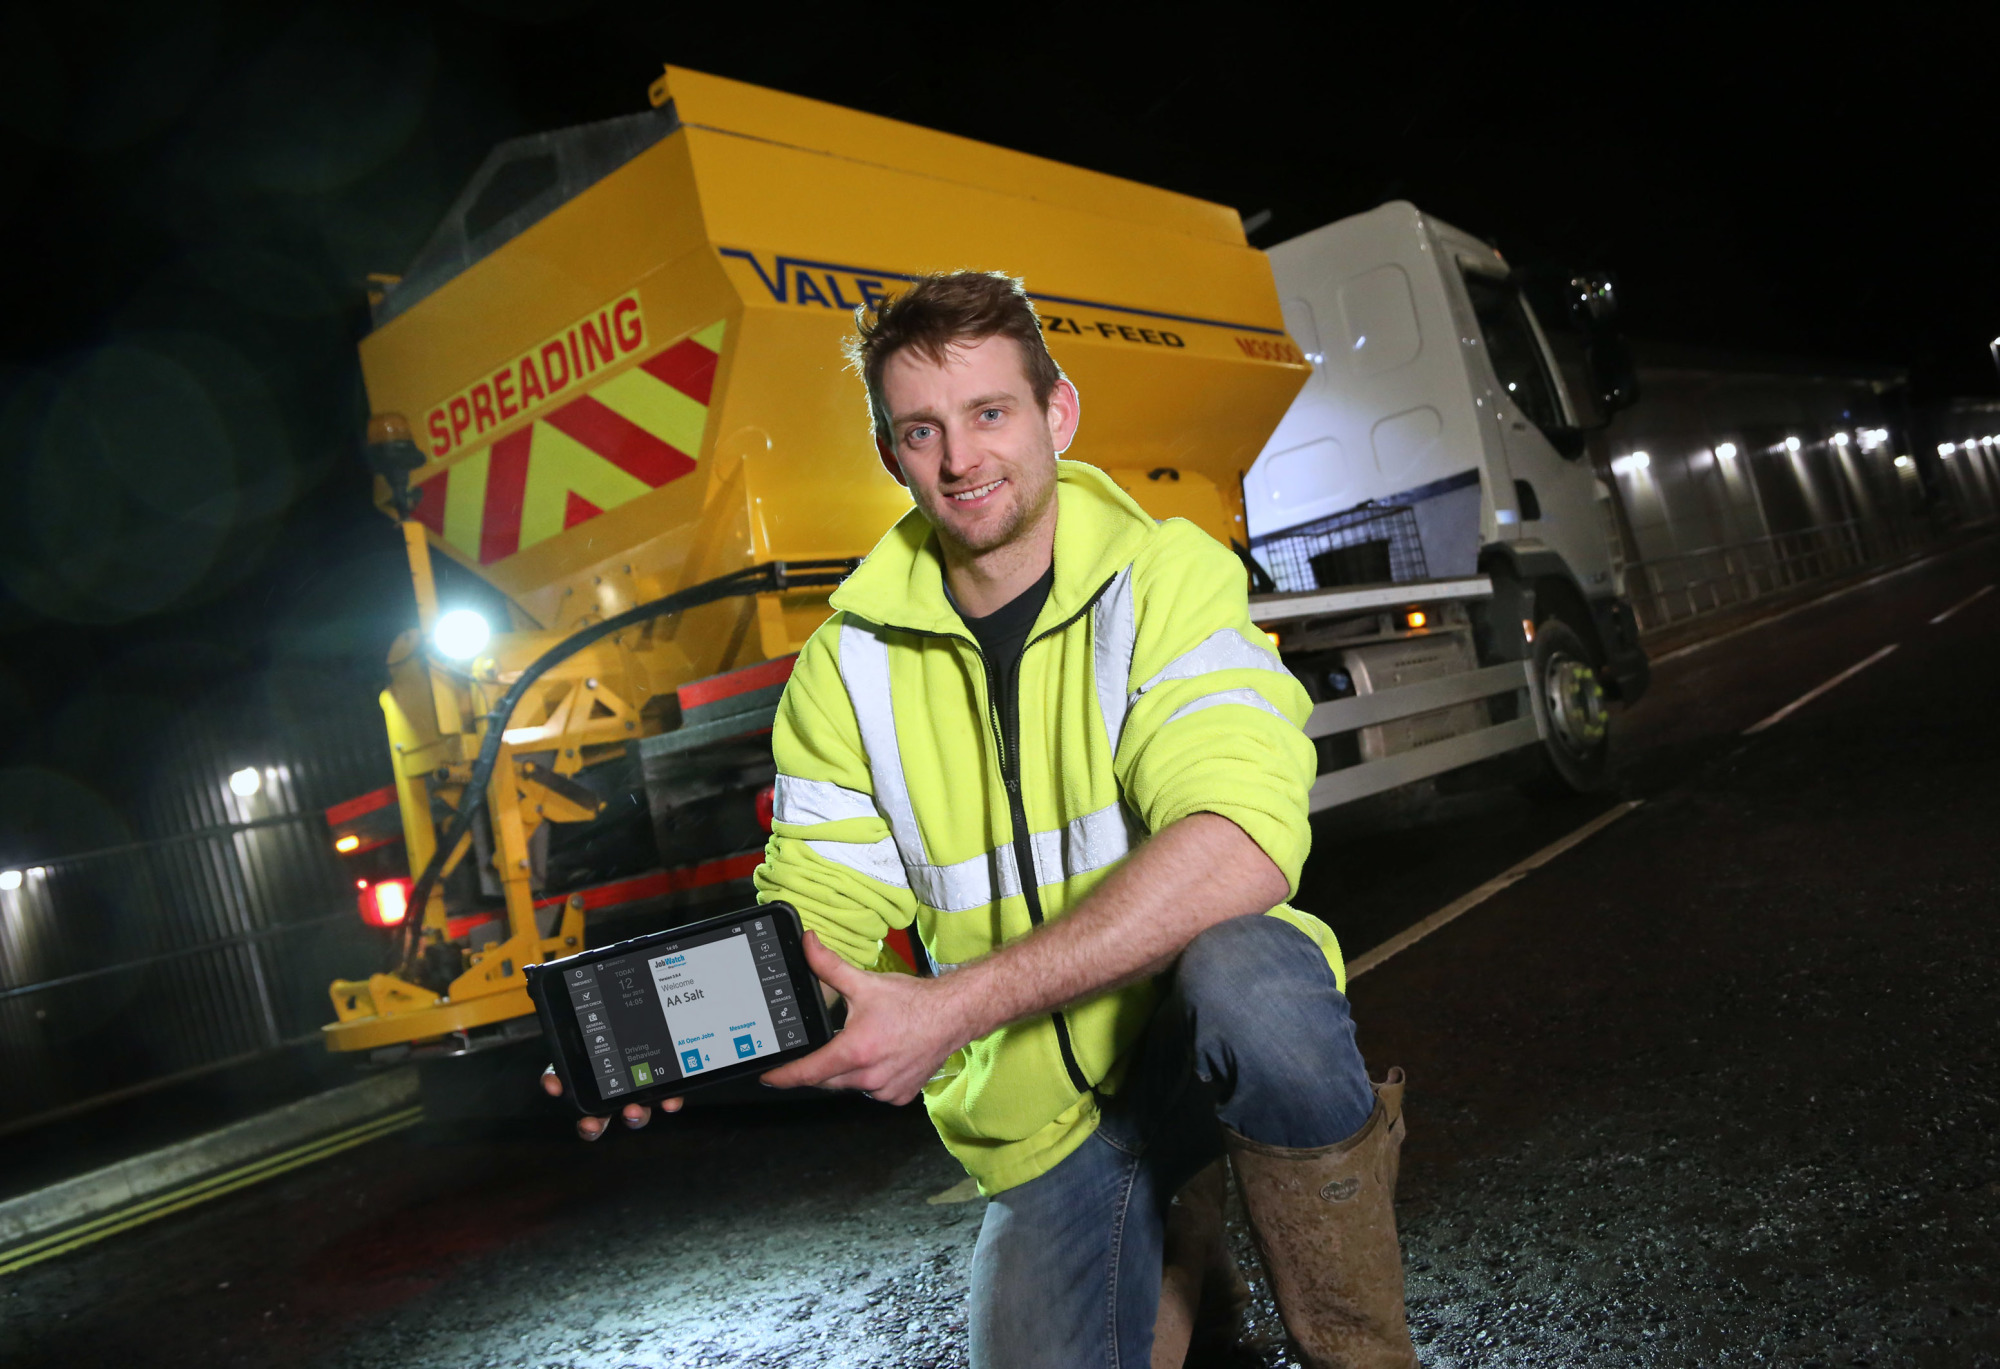 AA Salt gritting services has doubled the productivity of its operators with the introduction of the BigChange workforce management system.